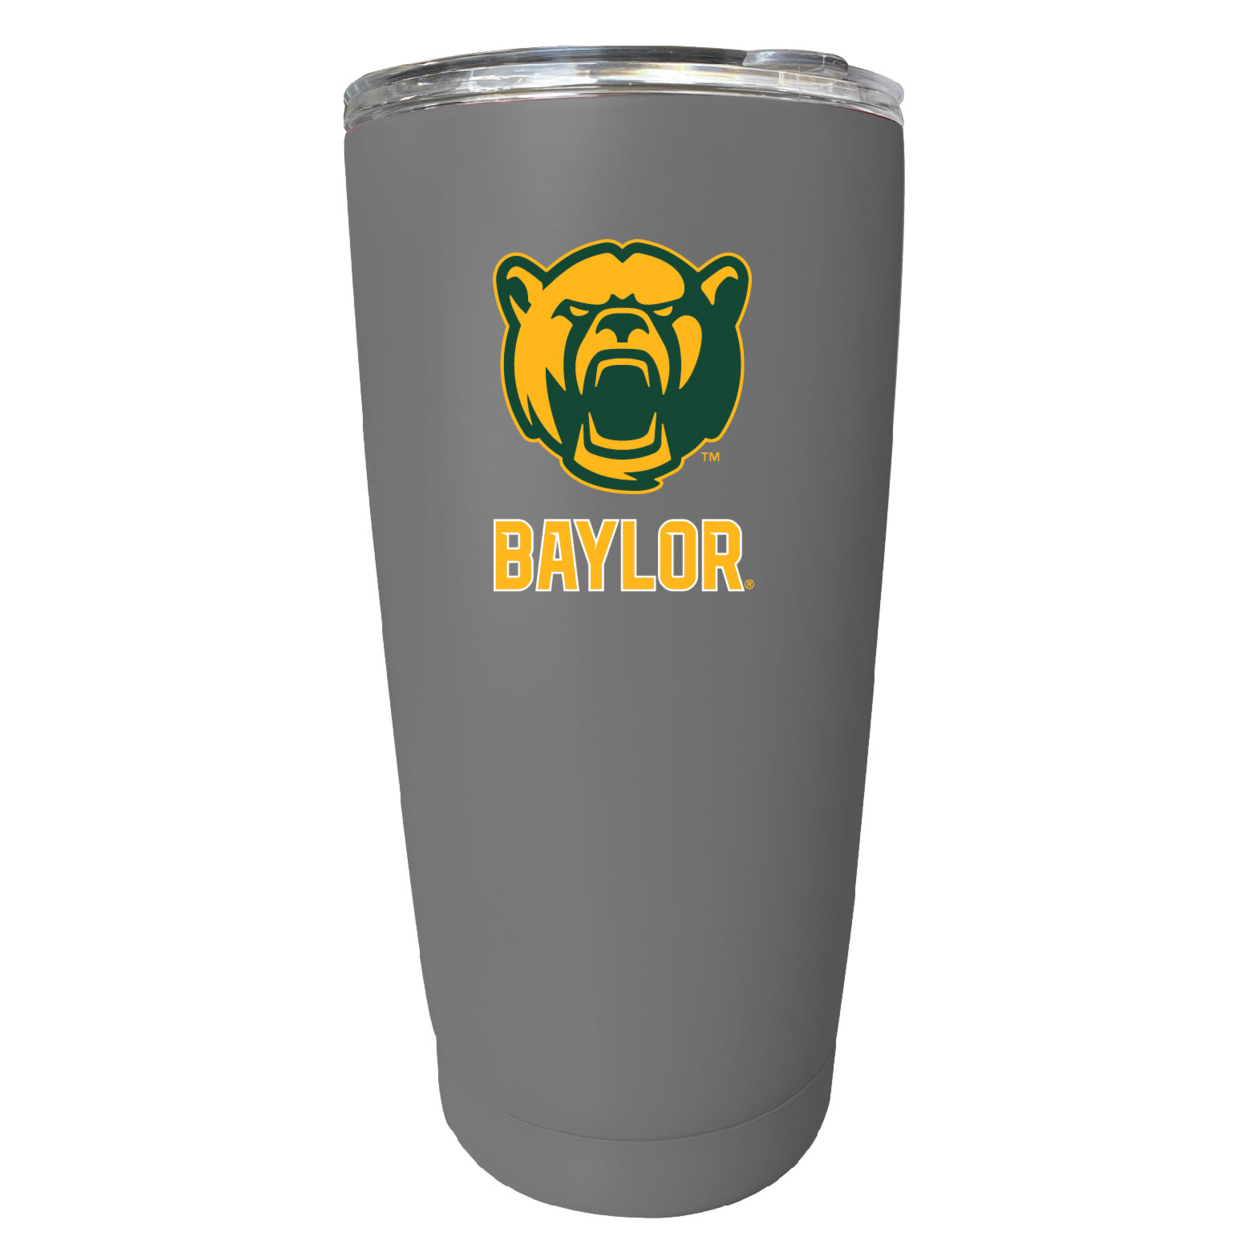 Baylor Bears 16 Oz Stainless Steel Insulated Tumbler - Gray